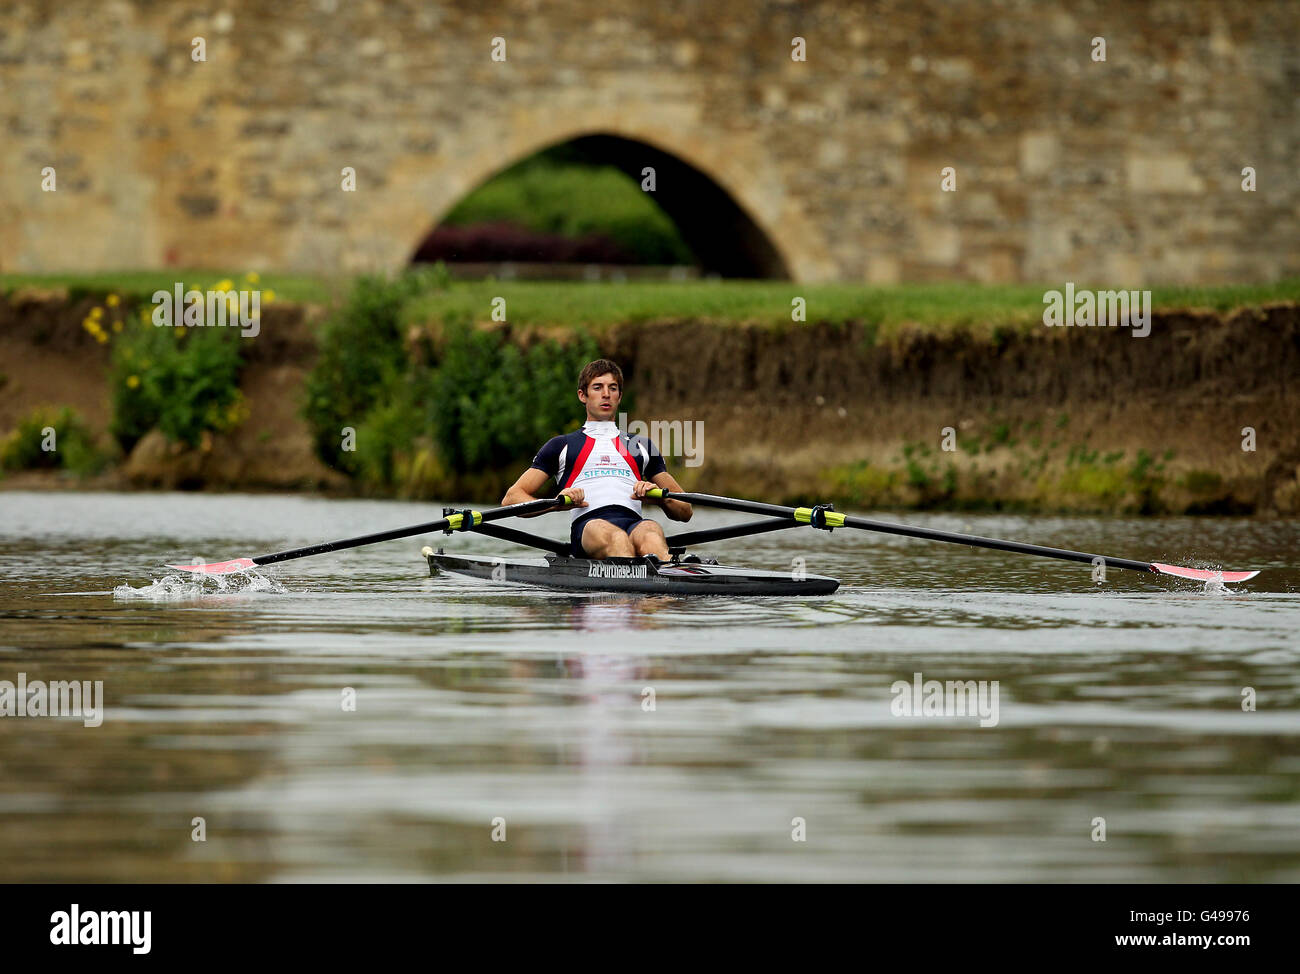 Great Britain's Zac Purchase during the photocall in Wallingford, Oxfordshire. Stock Photo